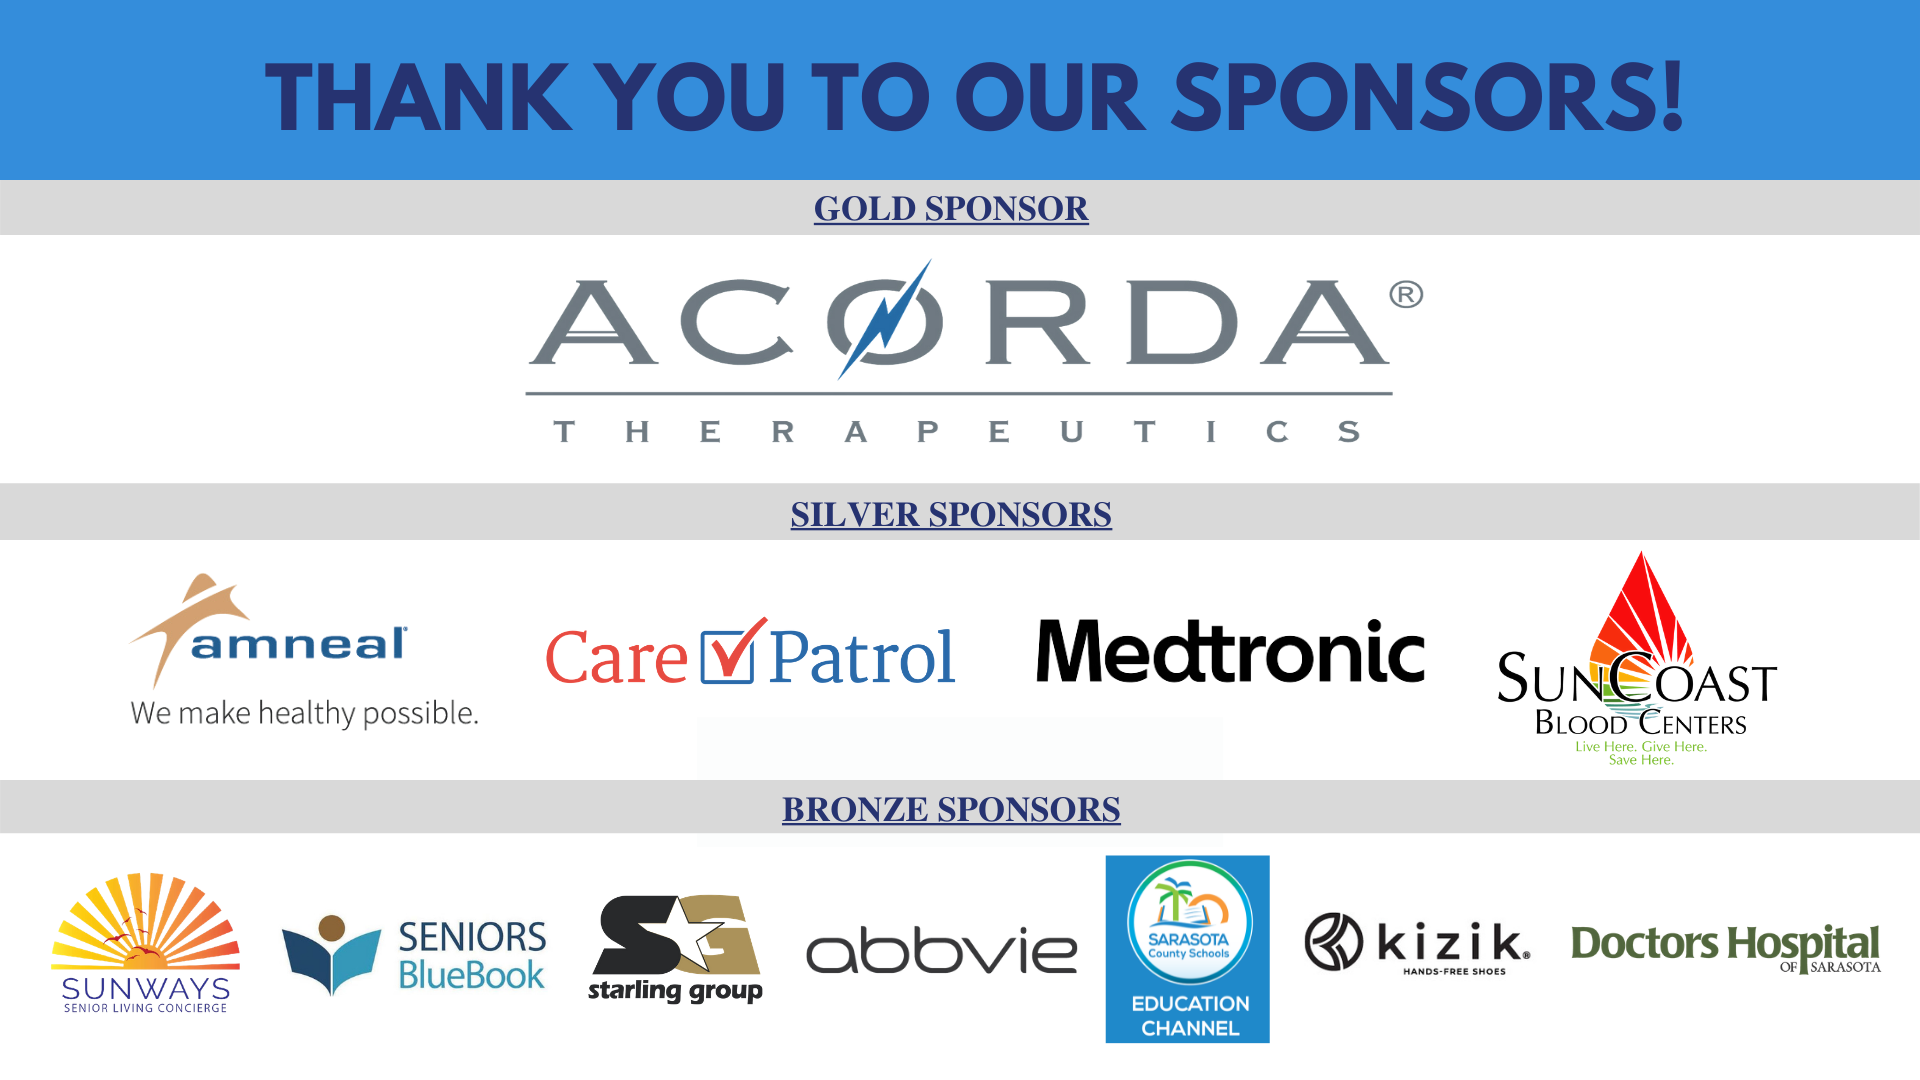 Thank you to our Sponsors